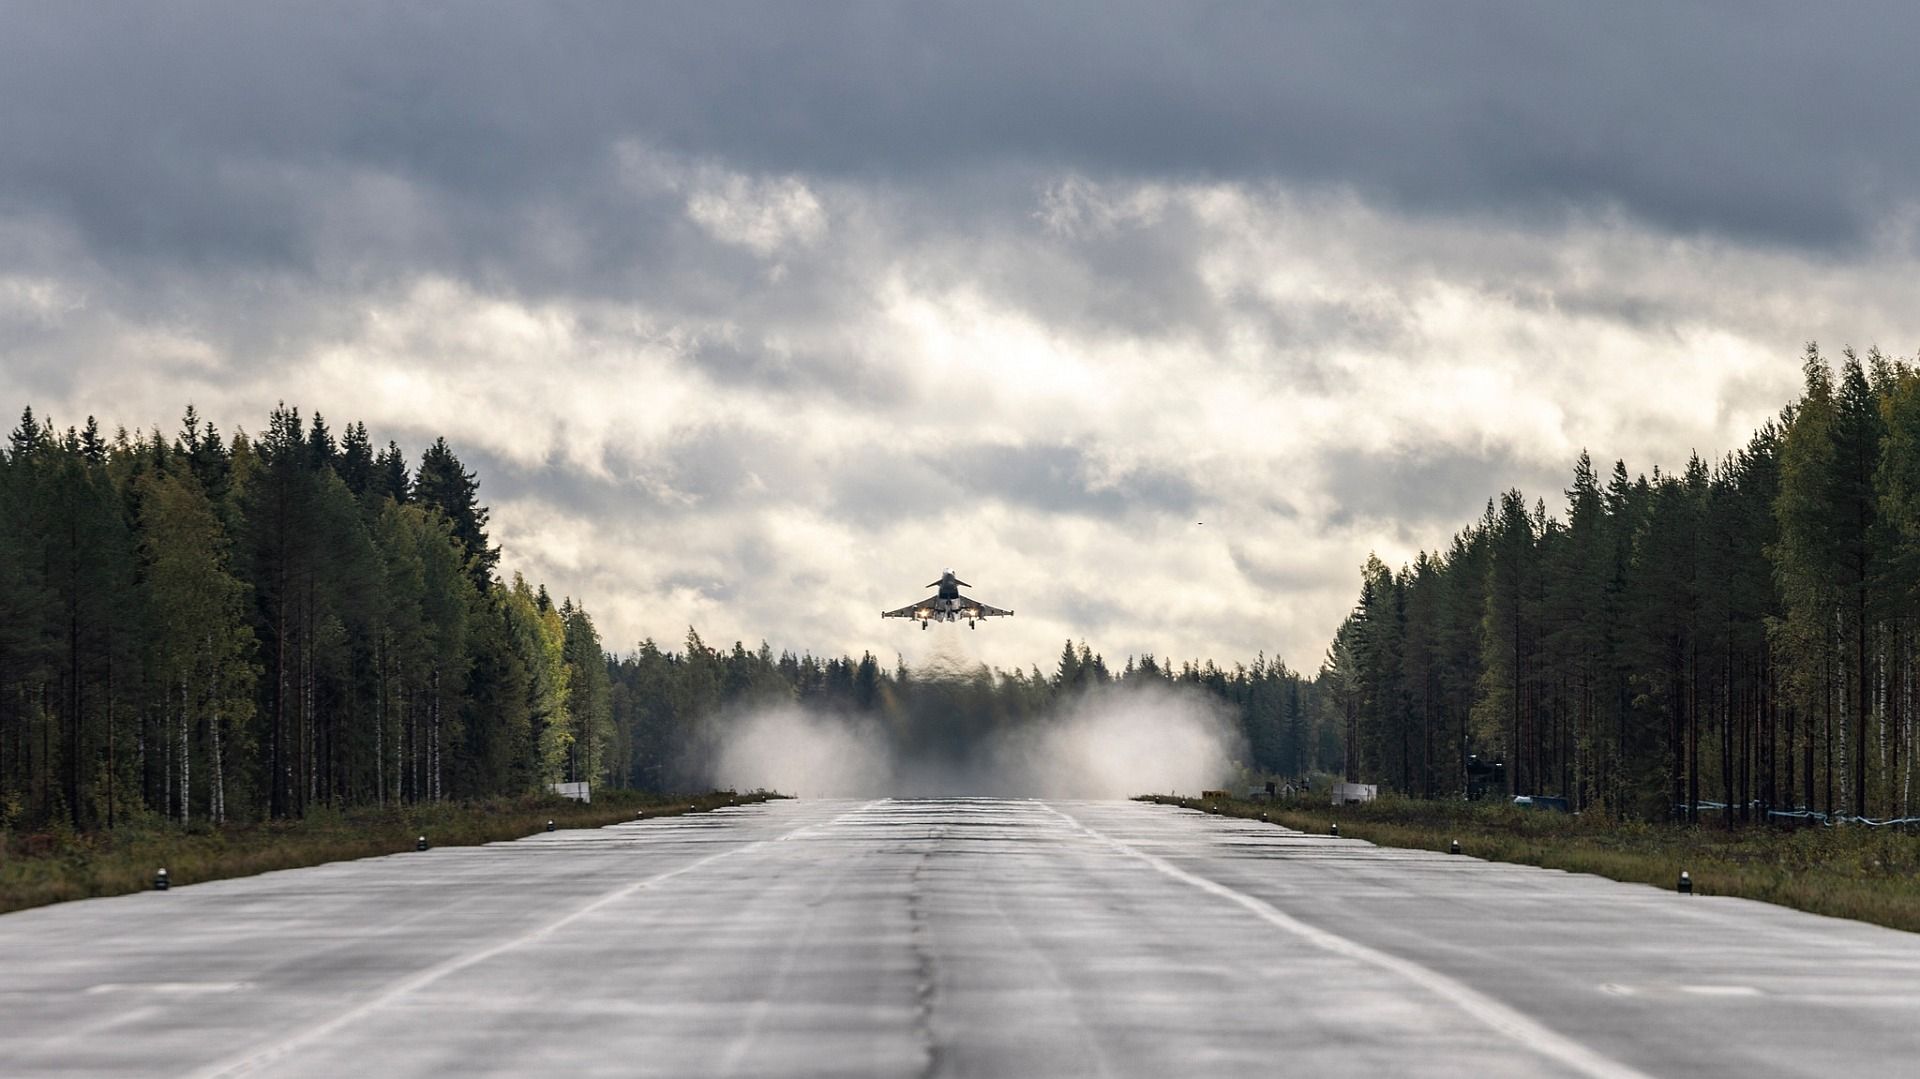 Typhoons Land And Take Off From A Road For First Time